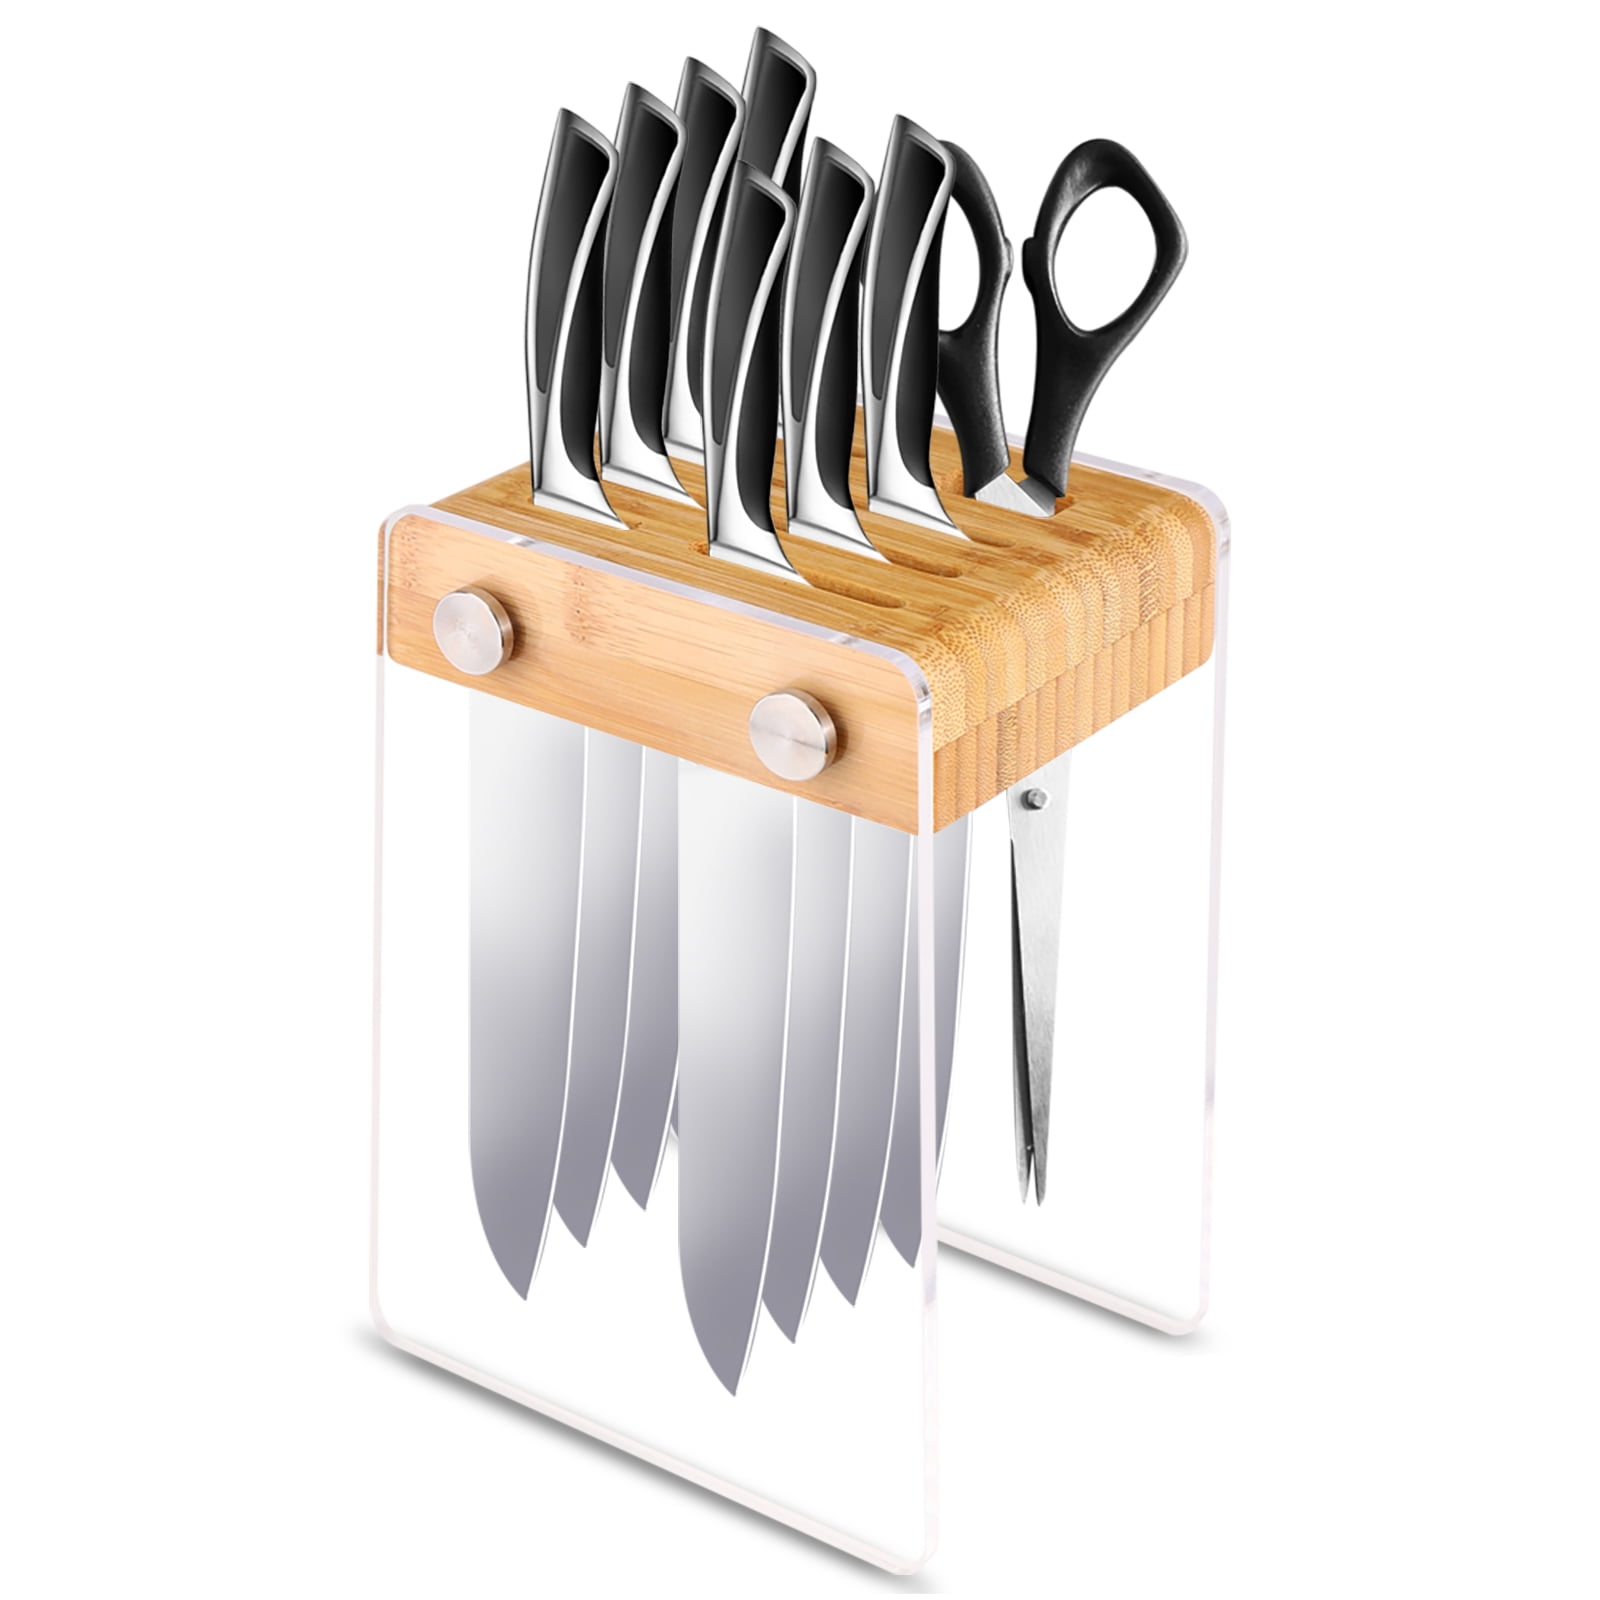  ENOKING Universal Knife Block without Knives, Acacia Wood Knife  Holder/Knife Organizer with Removable Plastic Bristles for Kitchen Counter  Knife Storage Rack: Home & Kitchen